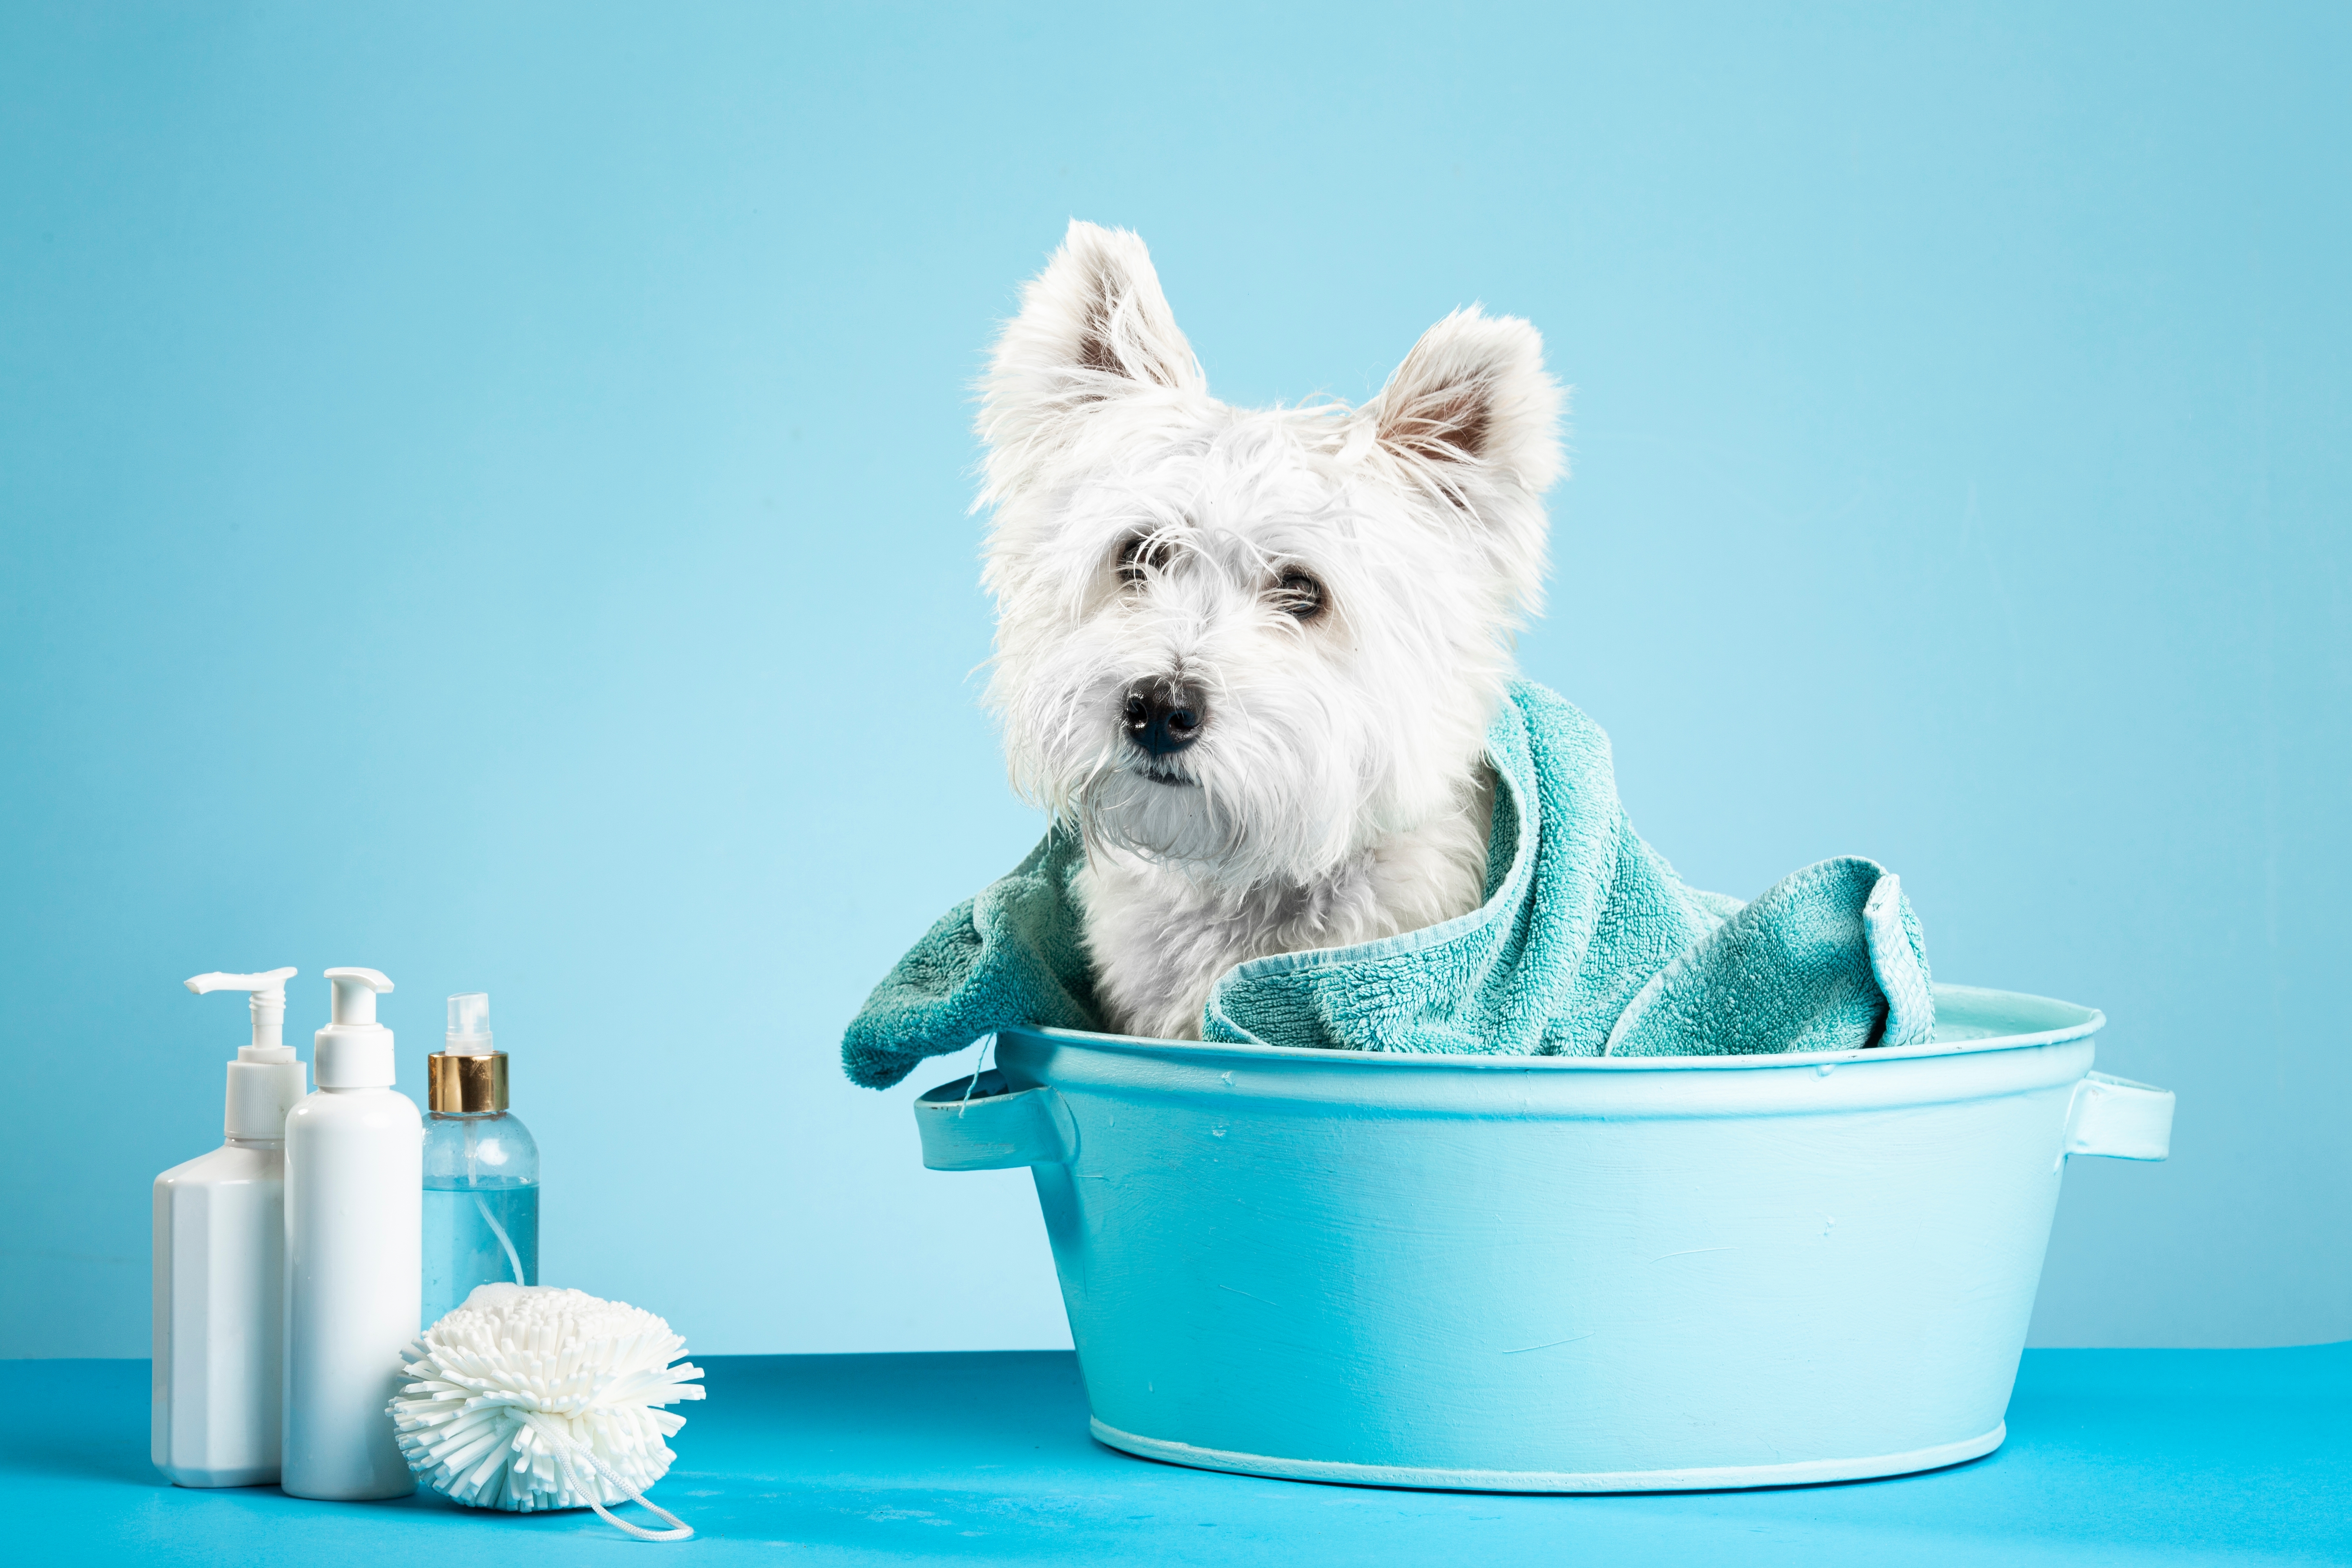 pet-cleaning-toiletry-product-analysis-1